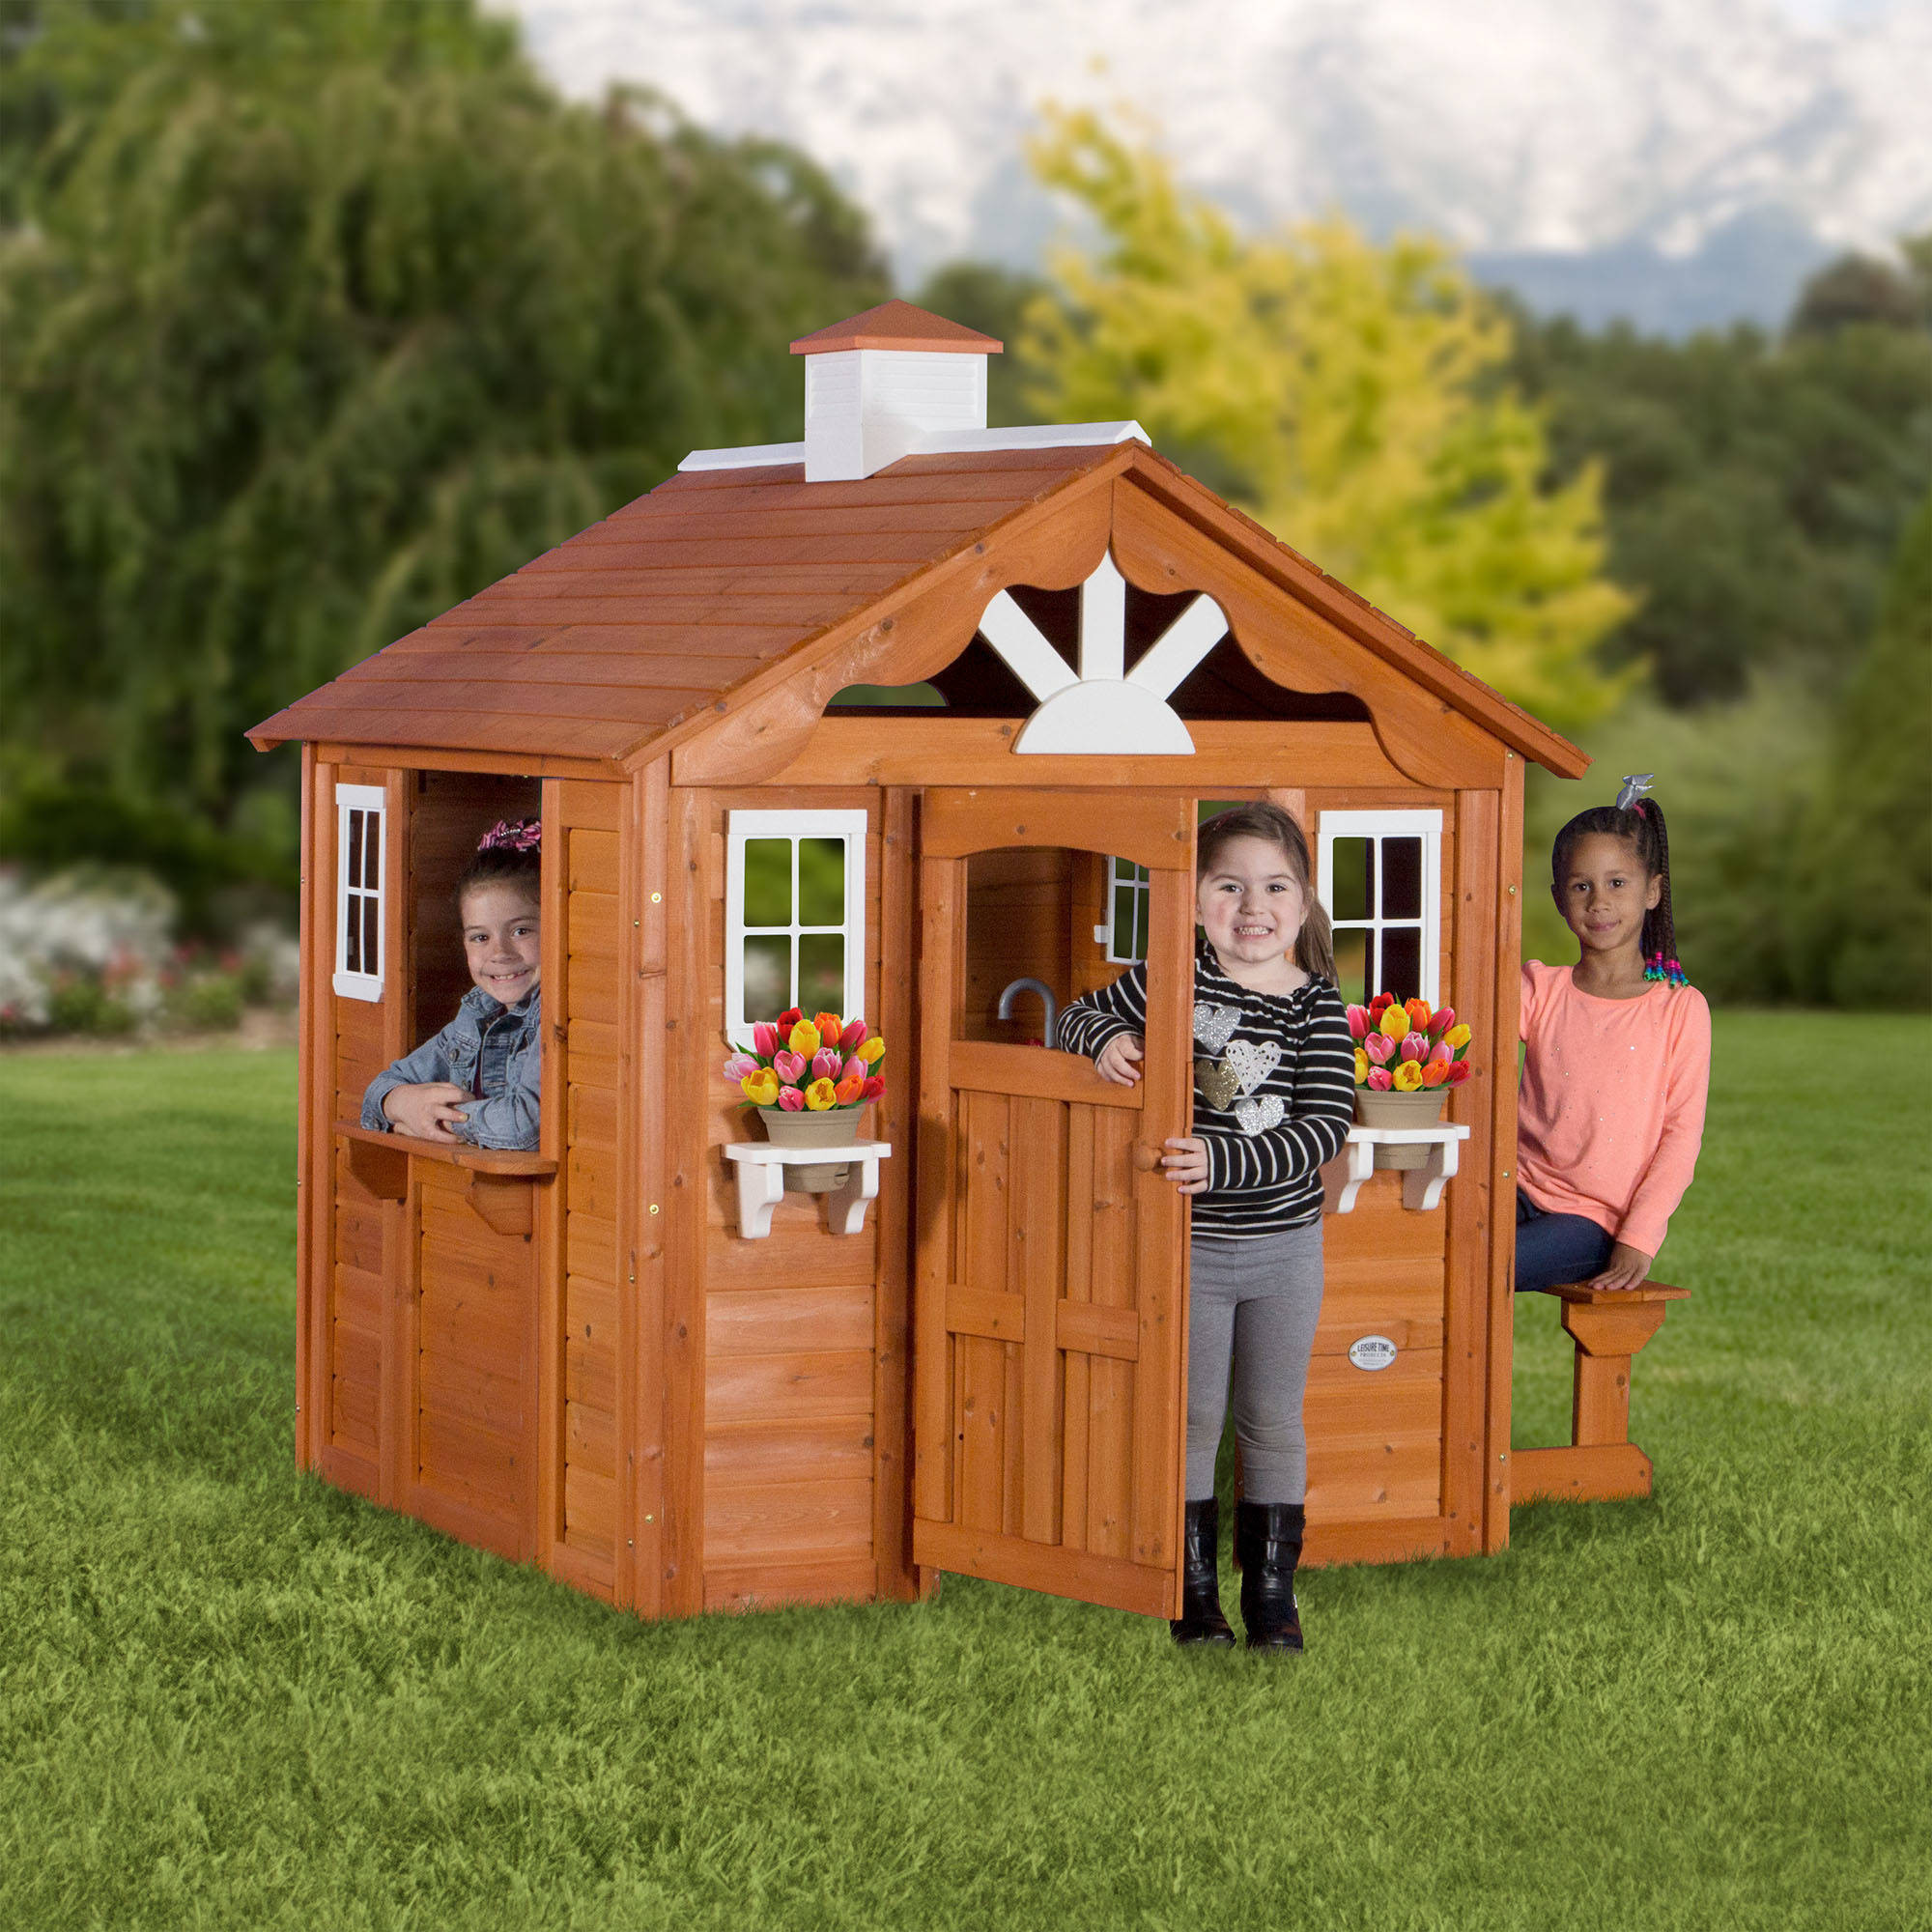 Outdoor Playhouse For Kids
 Playhouse Backyard Discovery Summer Cottage Wooden Cedar